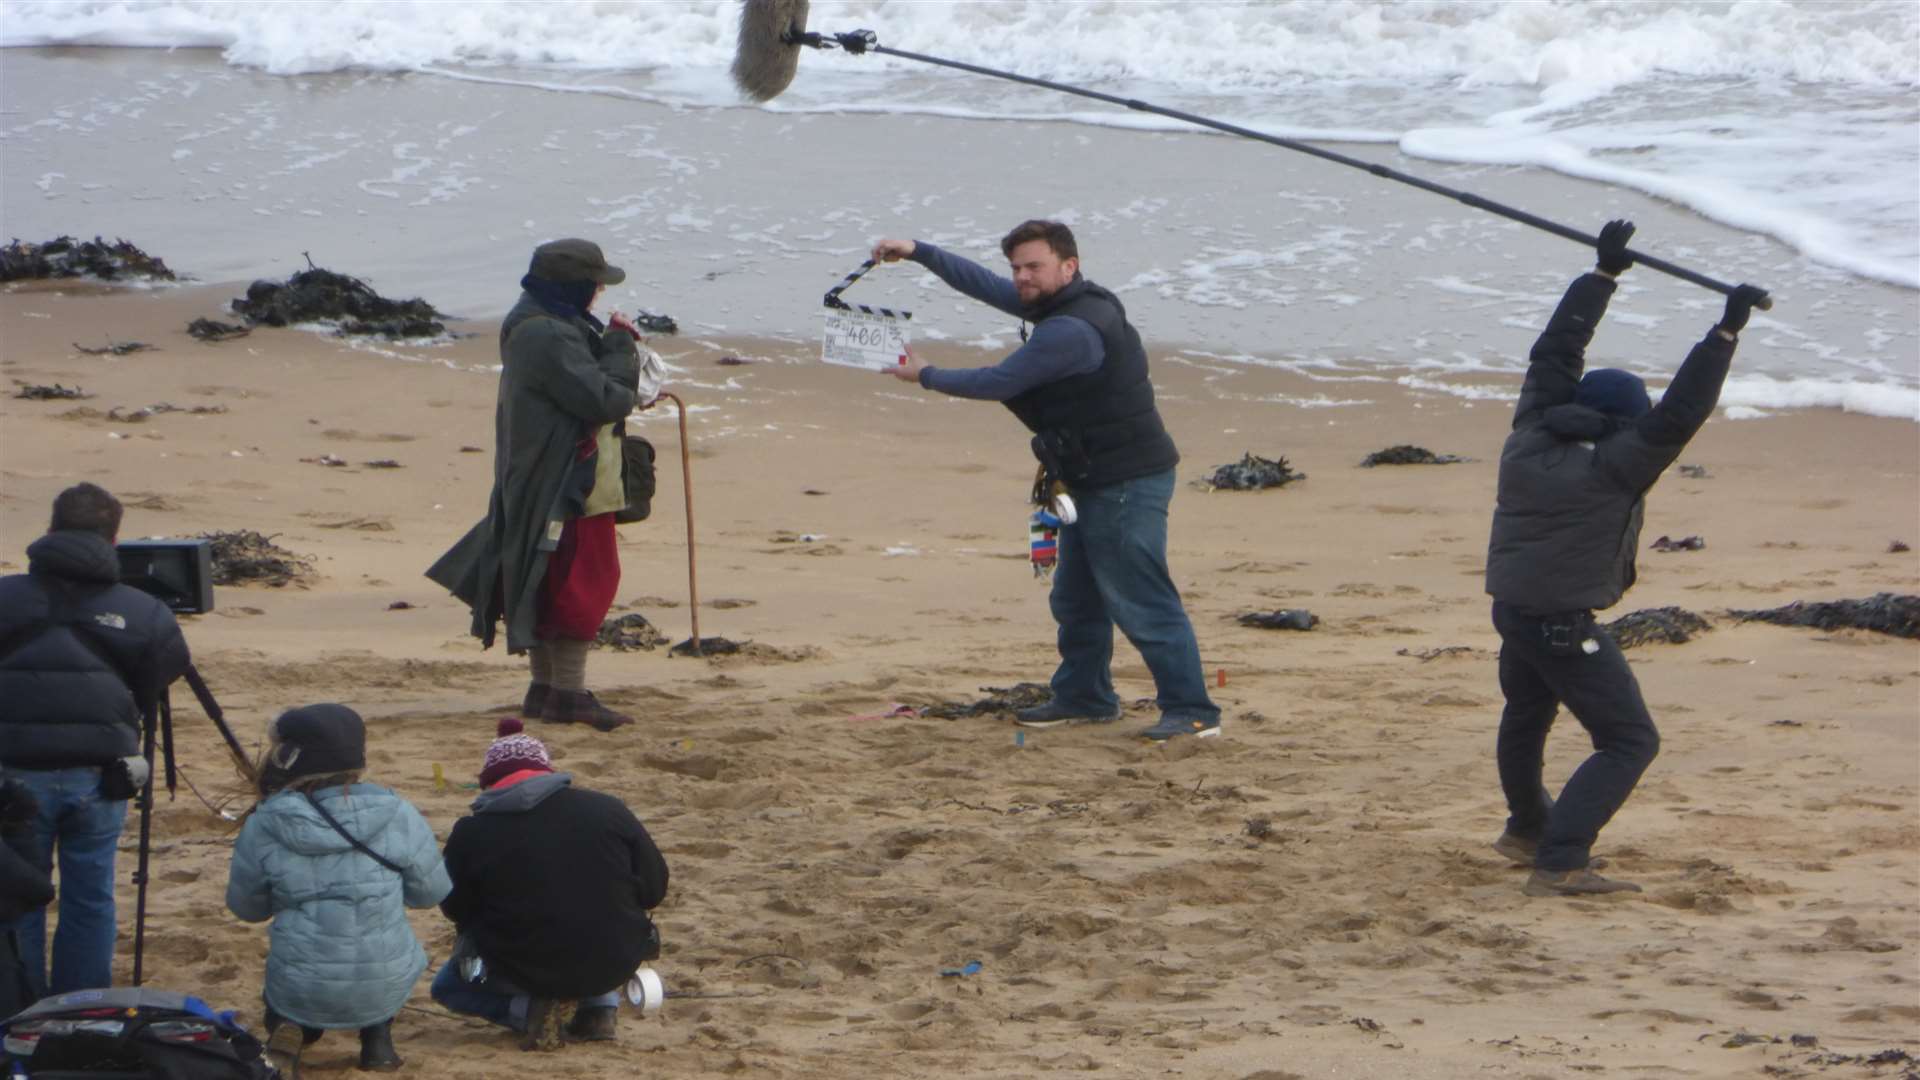 Filming takes place on the set of The Lady in the Van. Credit: Thanet District Council